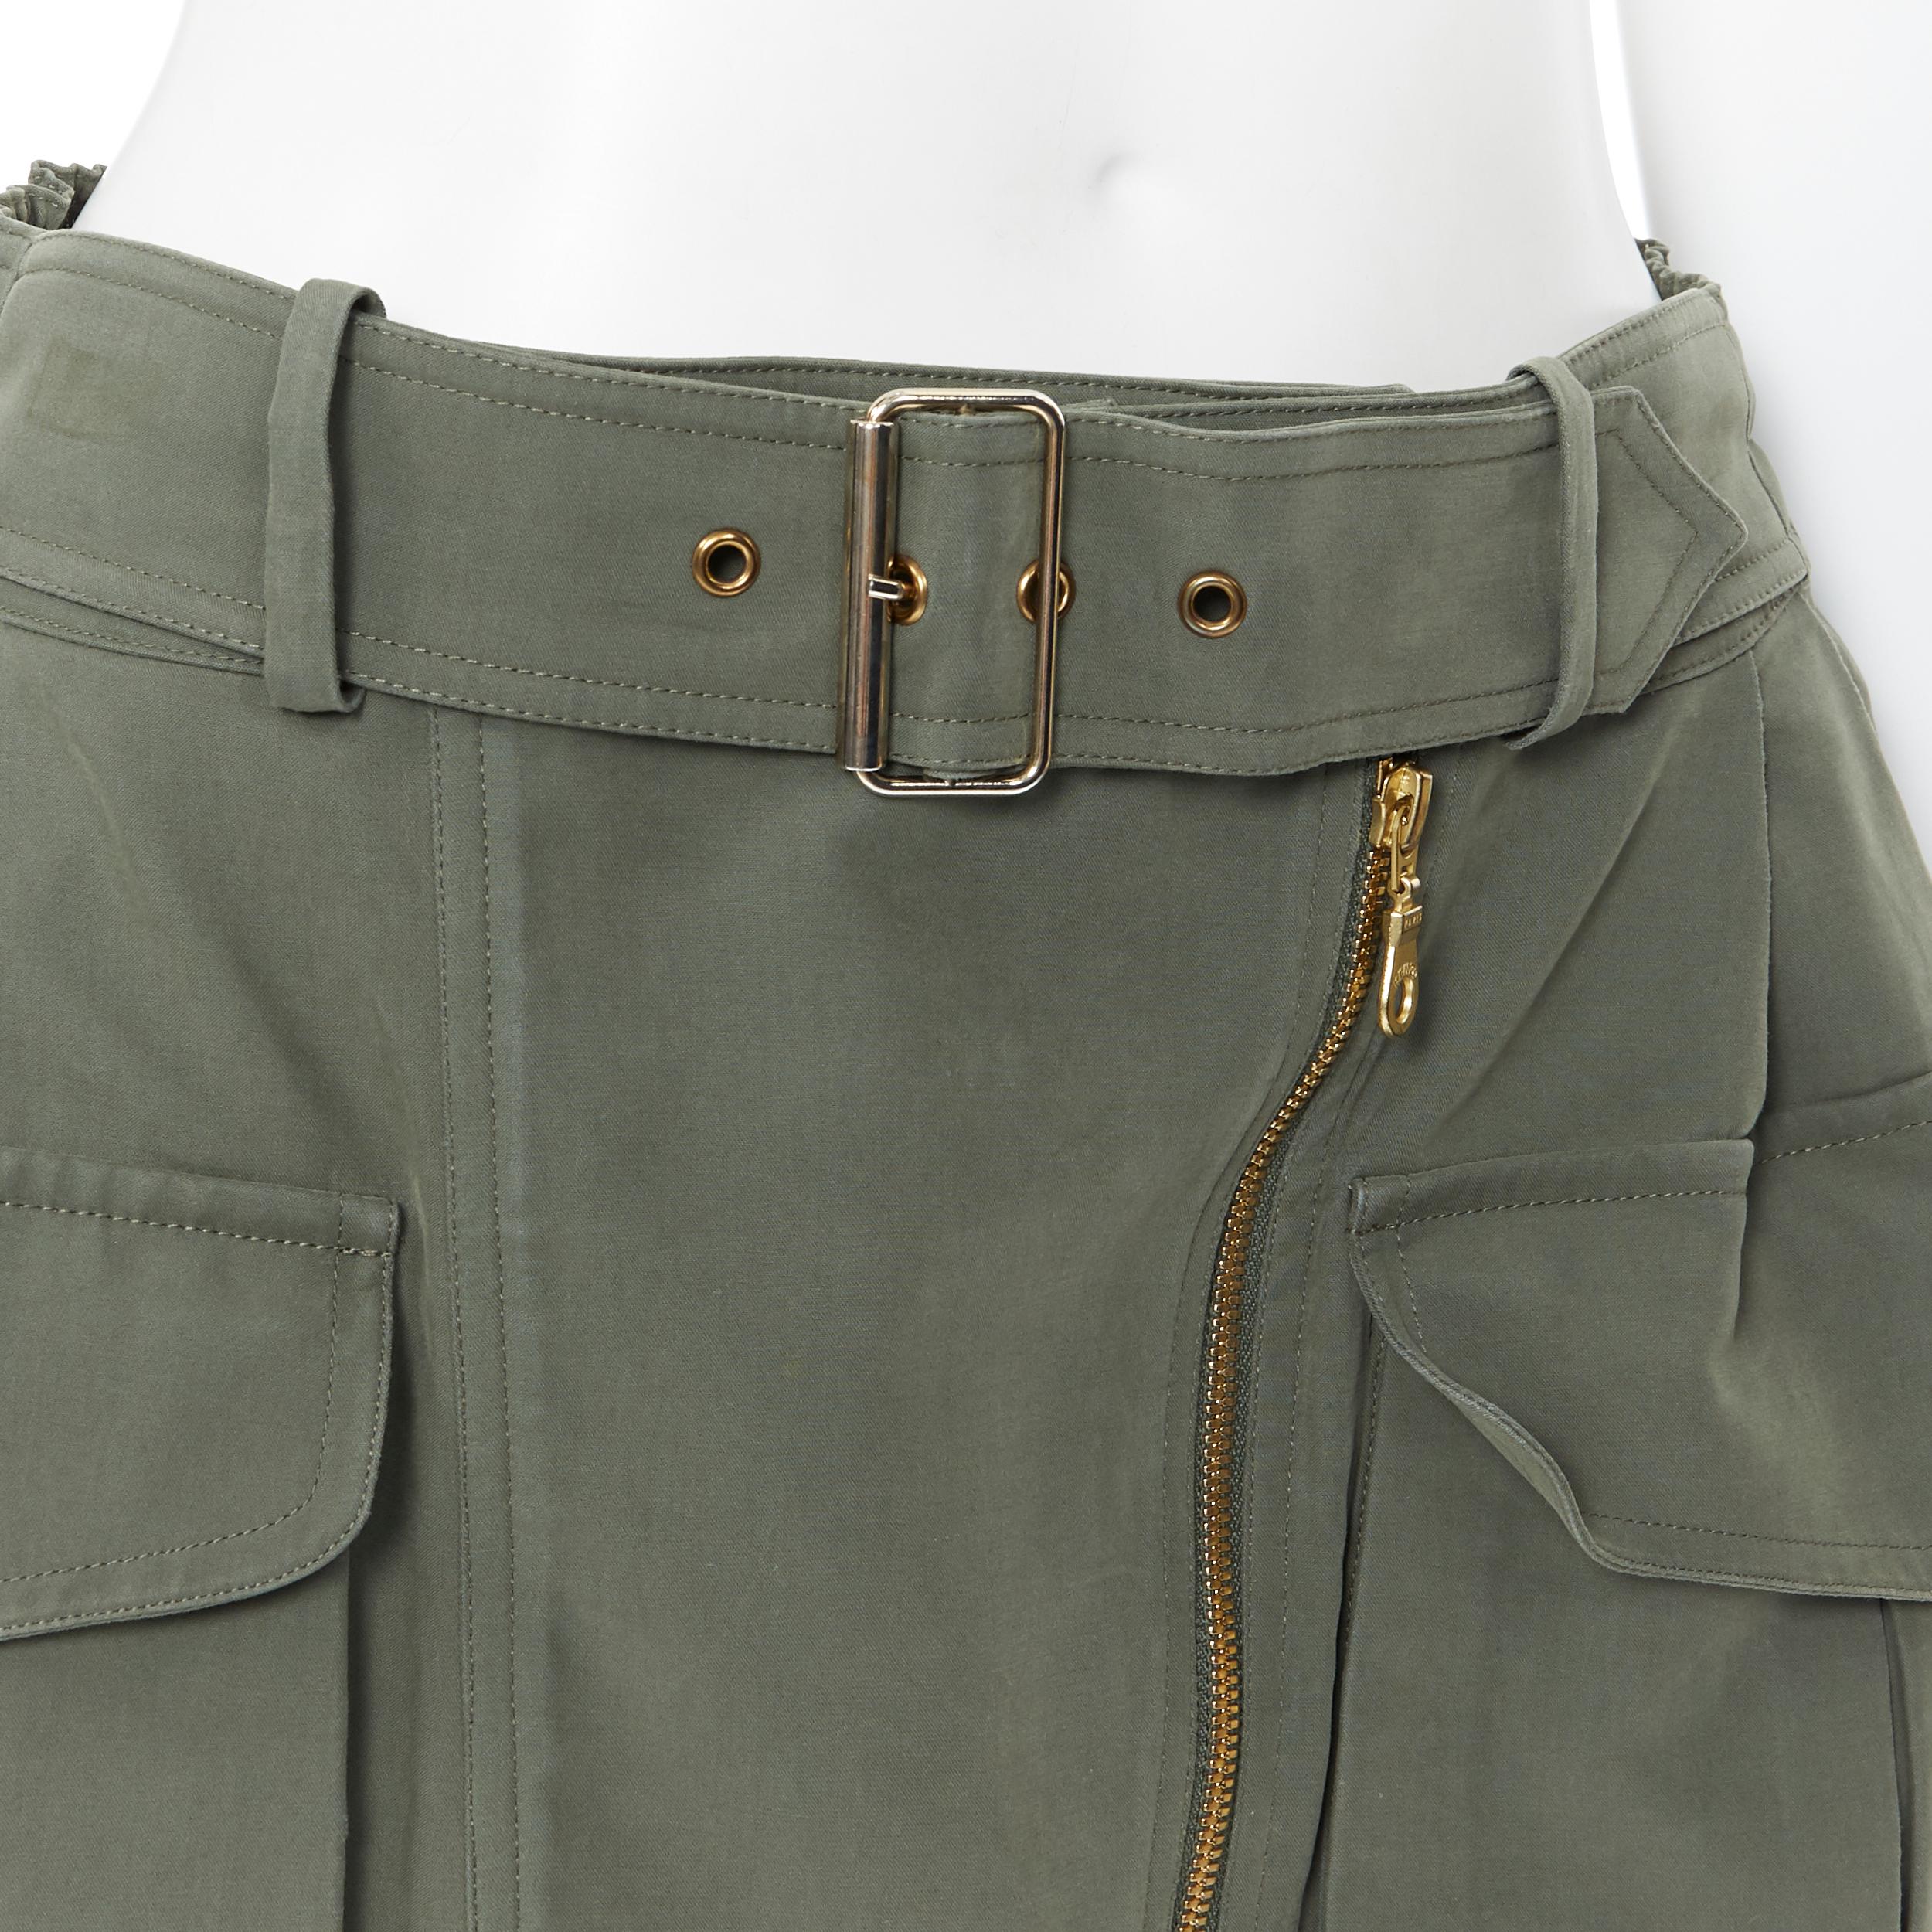 KENZO military khaki green cotton dual pockets belted elasticated skirt Fr38
Brand: Kenzo
Extra Detail: Attached belt design.

CONDITION:
Condition: Good, this item was pre-owned and is in good condition. 
Please refer to image gallery for thorough